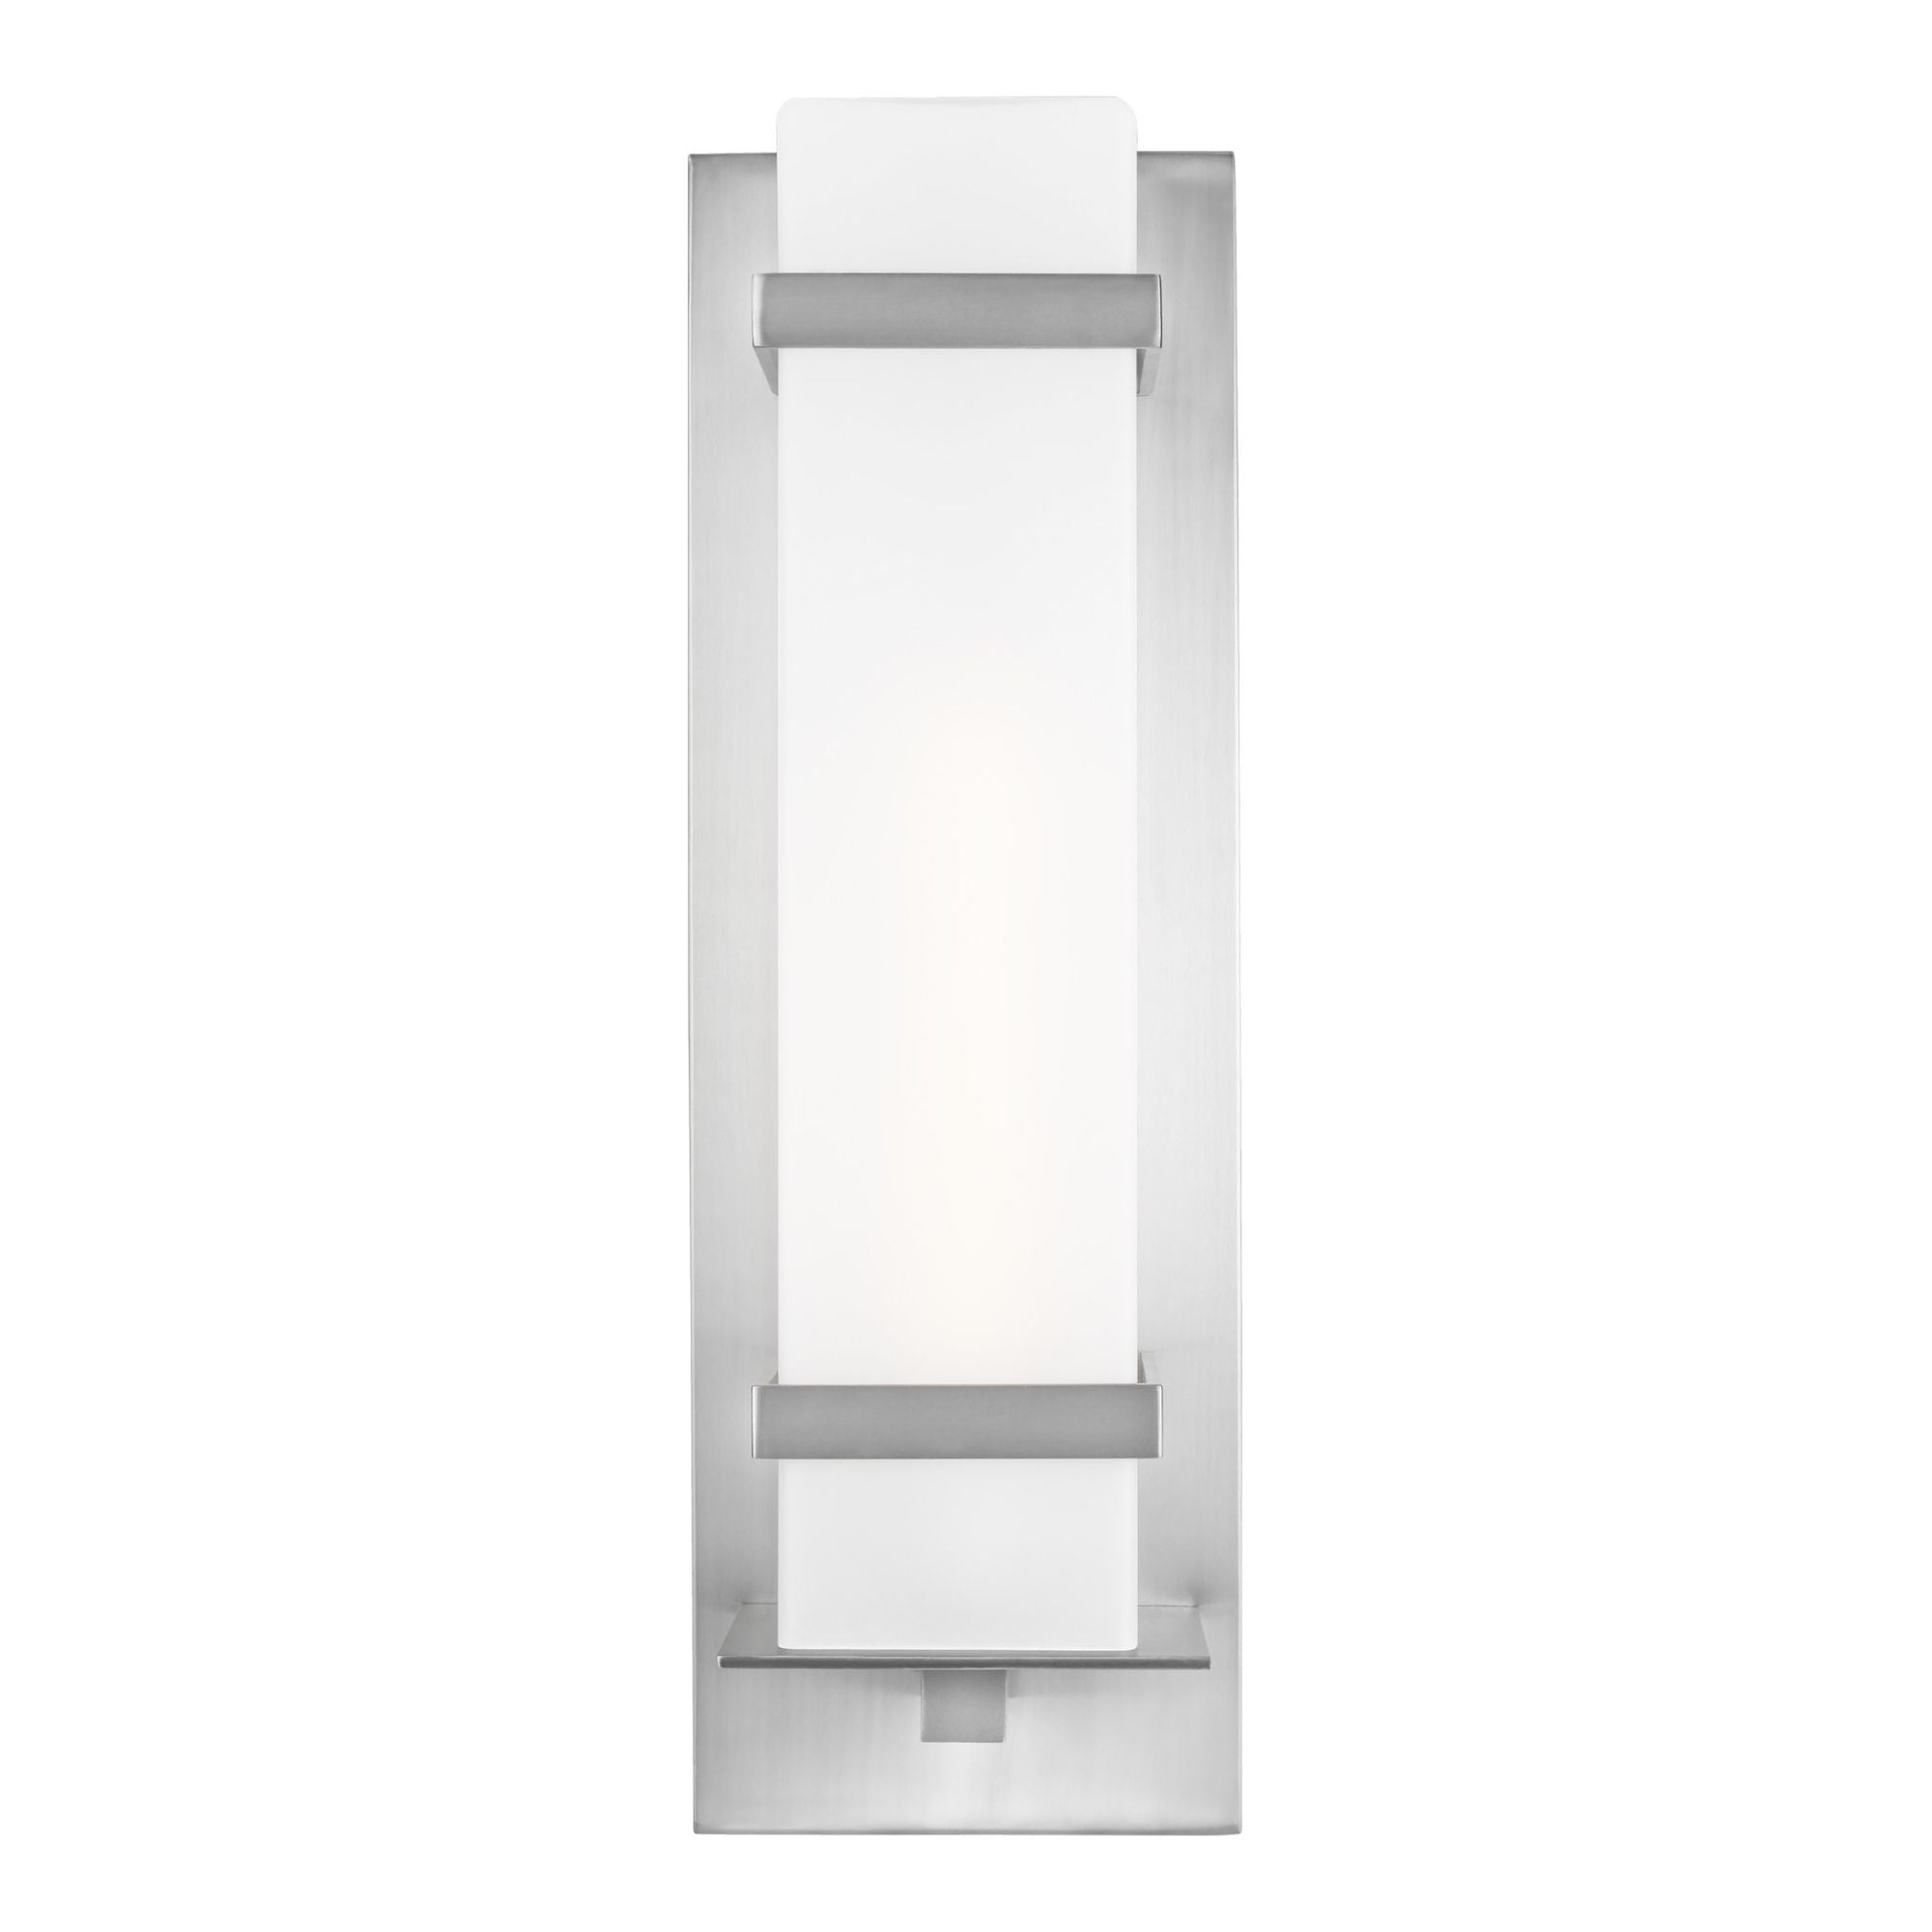 Alban Large One Light Outdoor Wall Lantern LED Modern Fixture 8" Width 24.625" Height Aluminum Square Etched Opal Shade in Satin